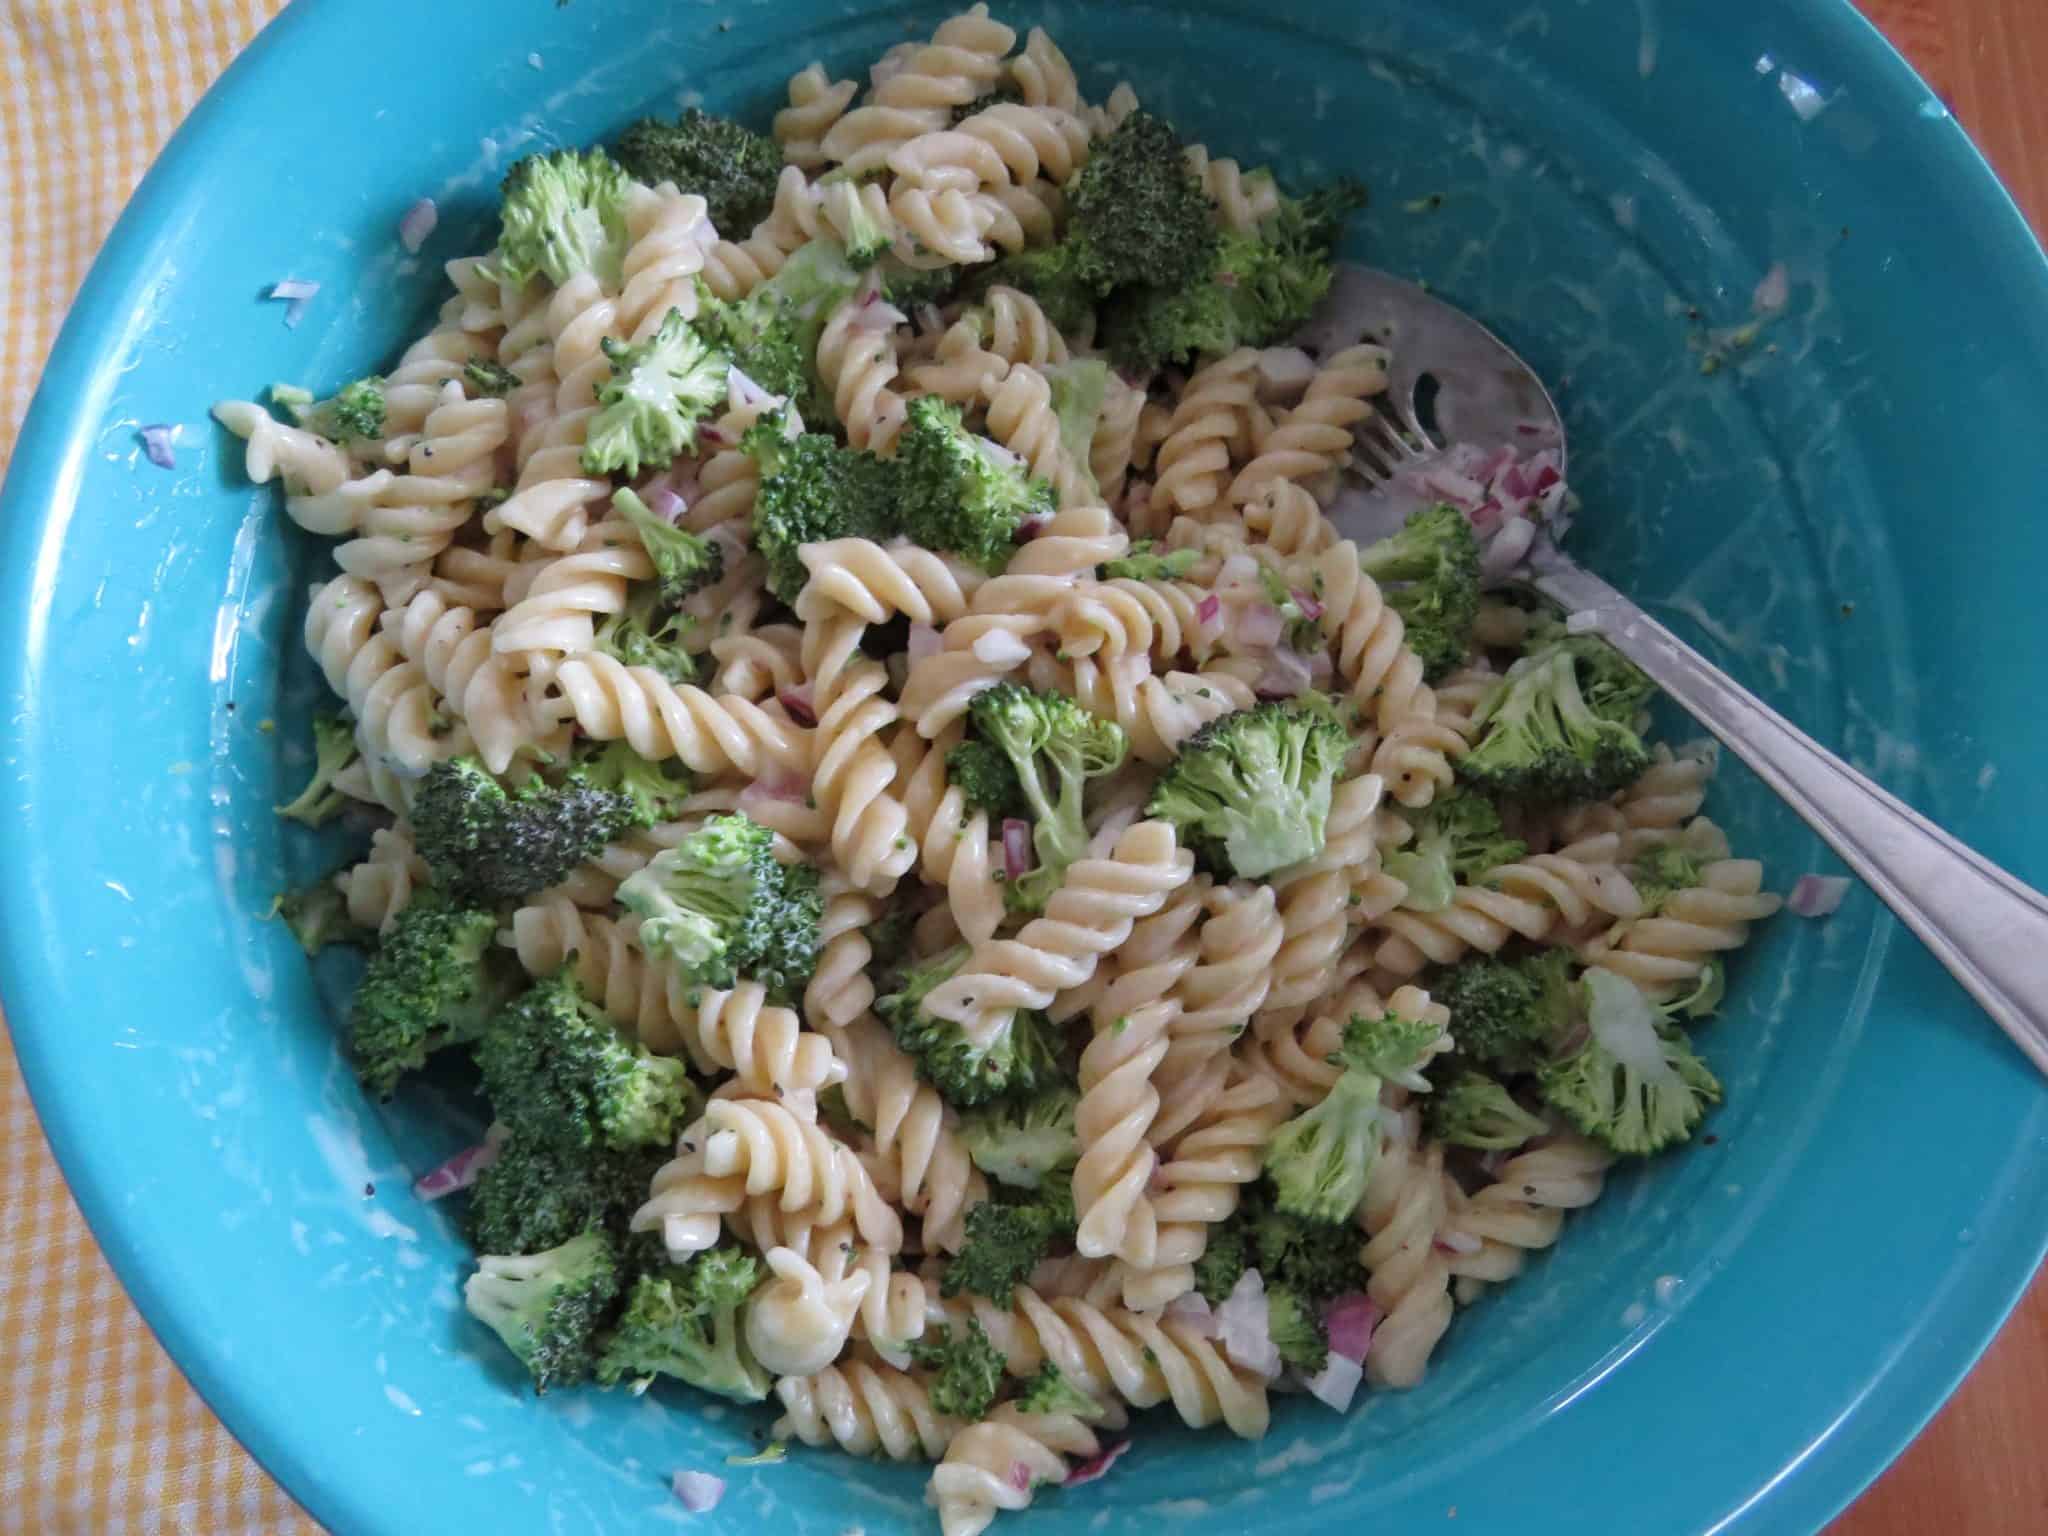 pasta salad being mixed together in a blue bowl.